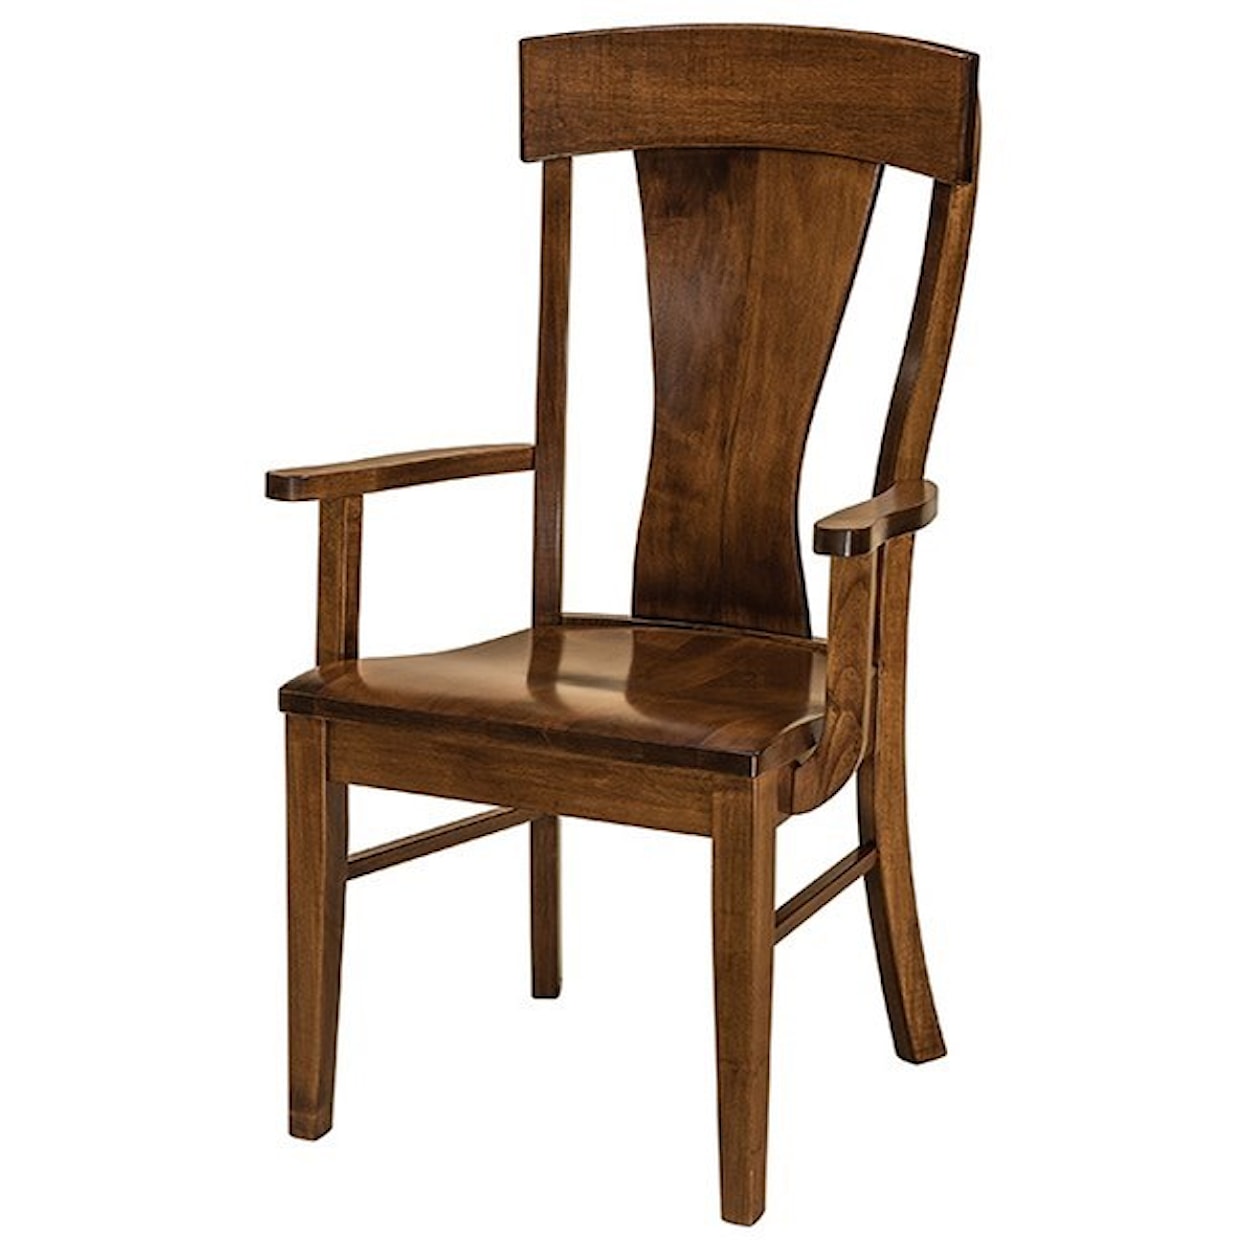 F&N Woodworking Ramsey Arm Chair